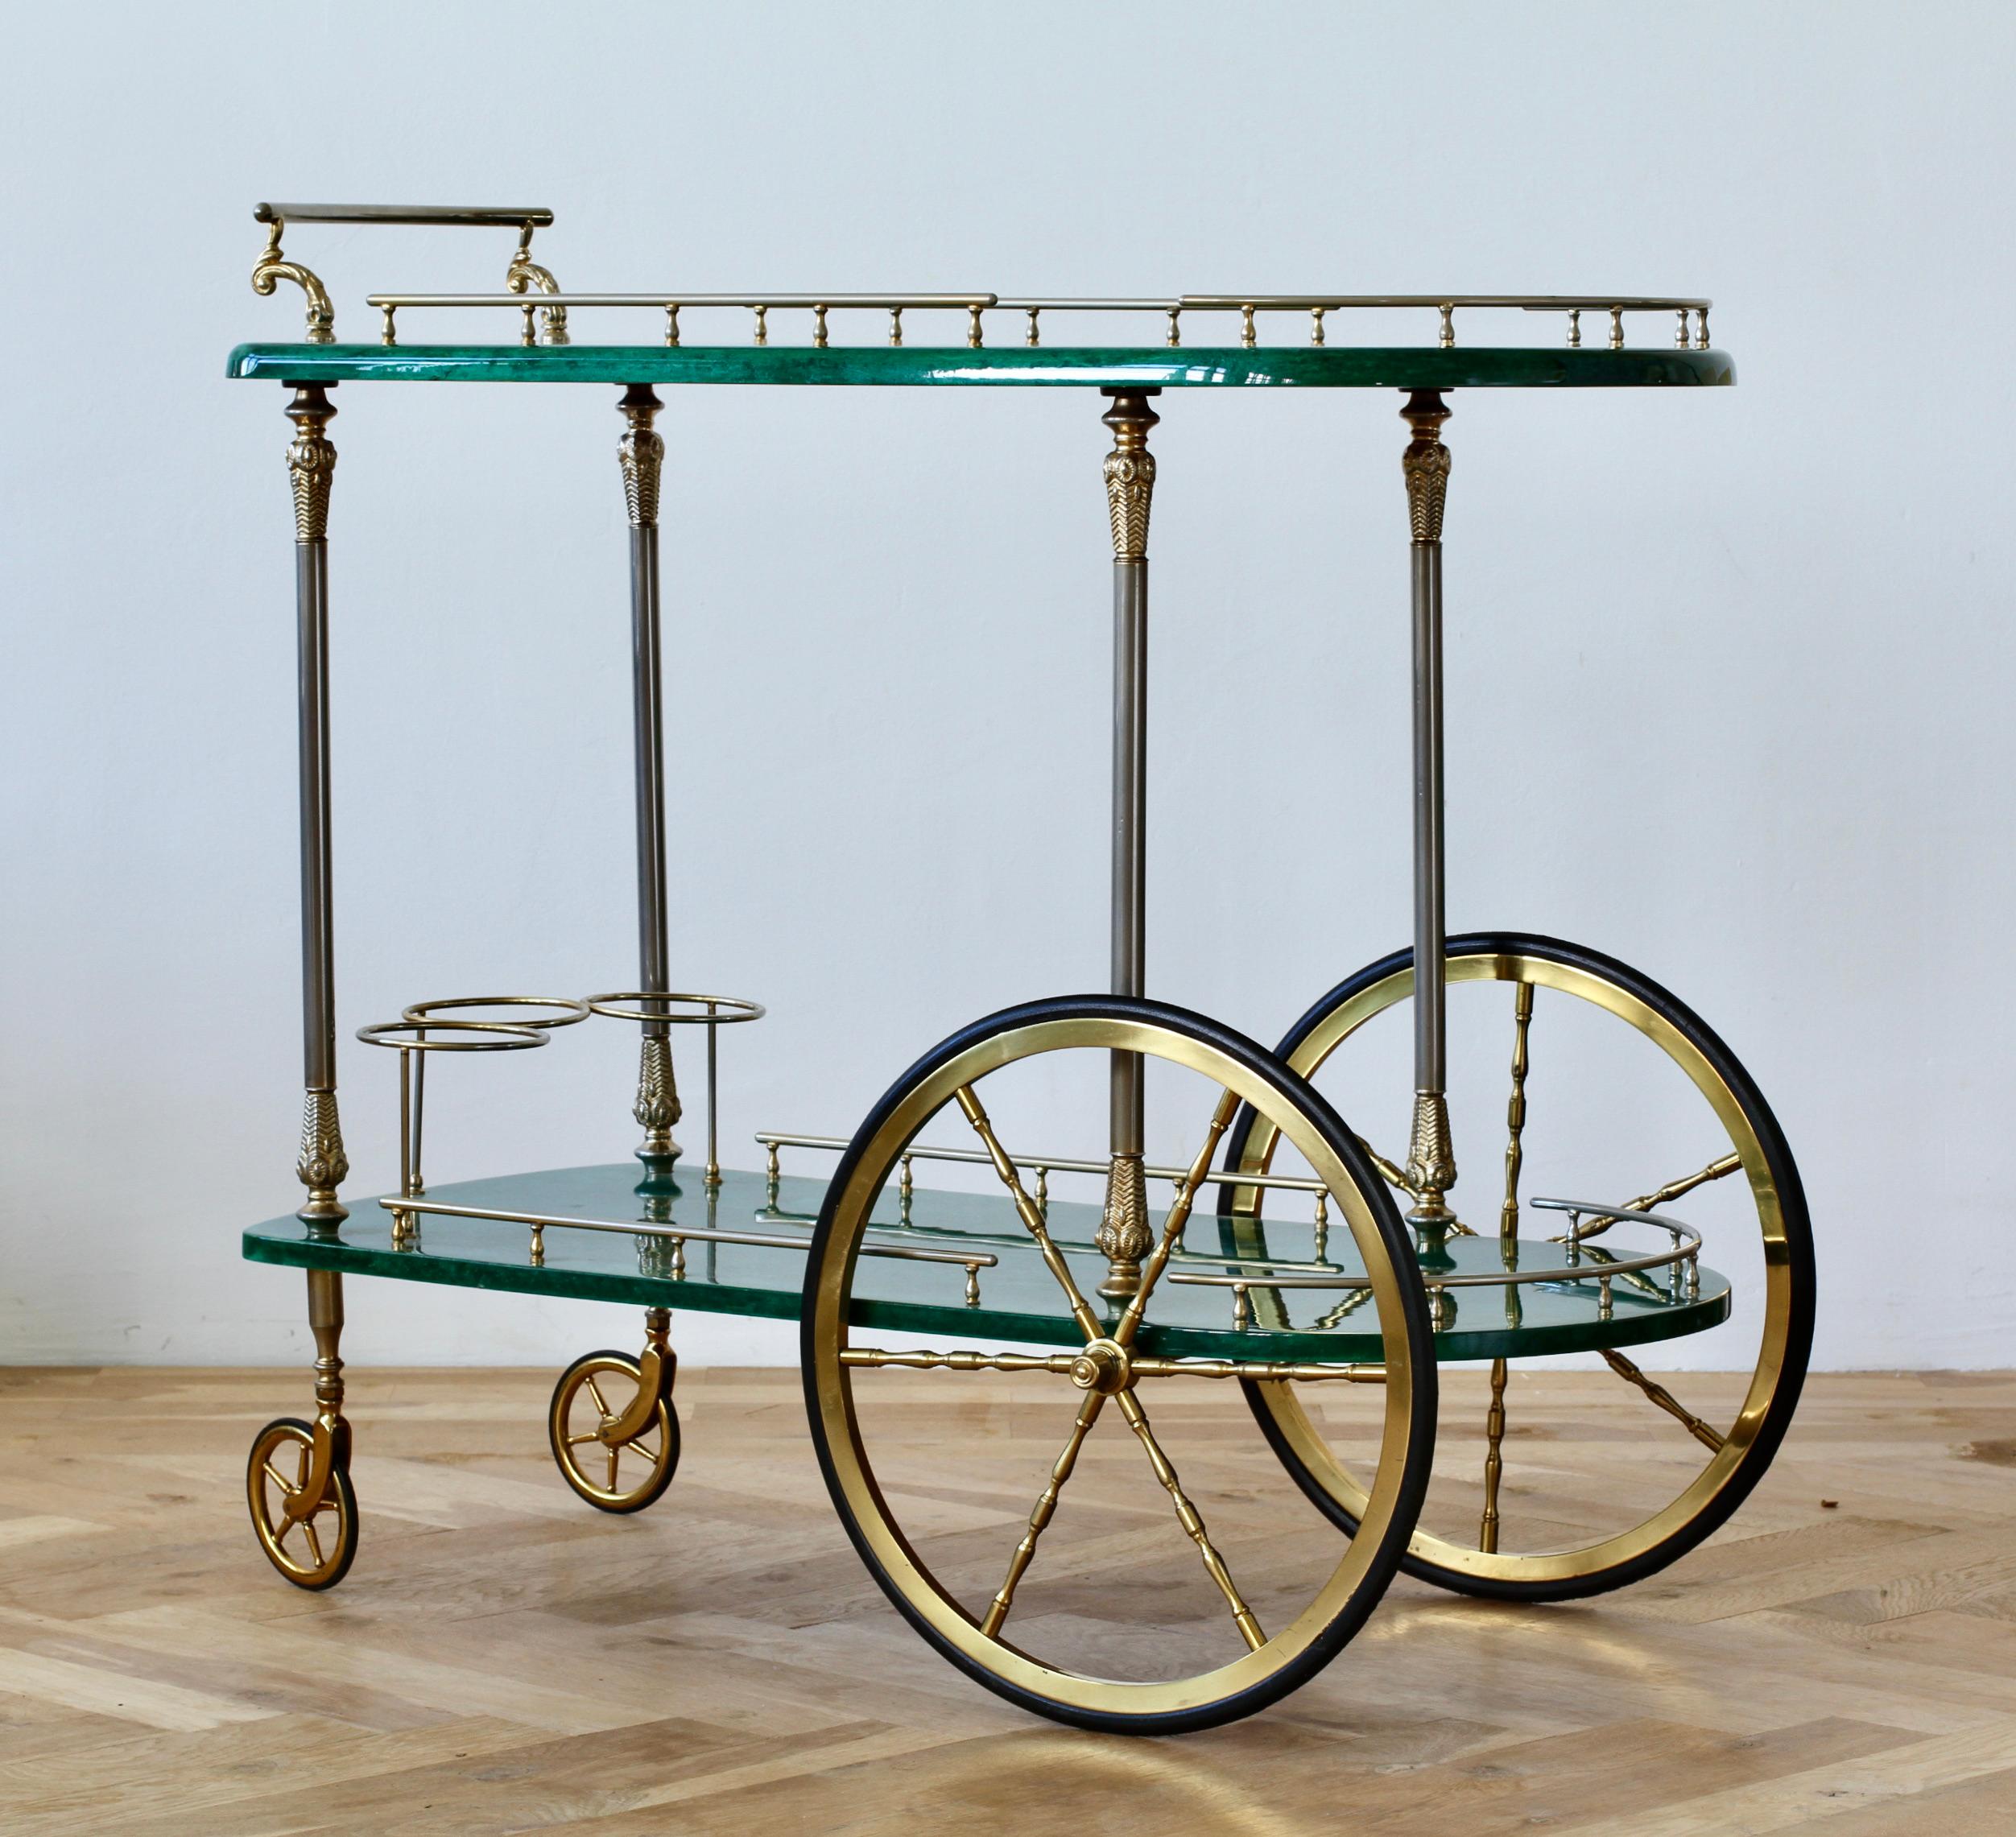 Large Italian 1950s bar cart, tea trolley or drinks stand by Aldo Tura, Milan. Stunning green colored (coloured) and lacquered goatskin leather combined with gilded cast metal handles, rails and finals.

Original 'Tura Milano' label is present on